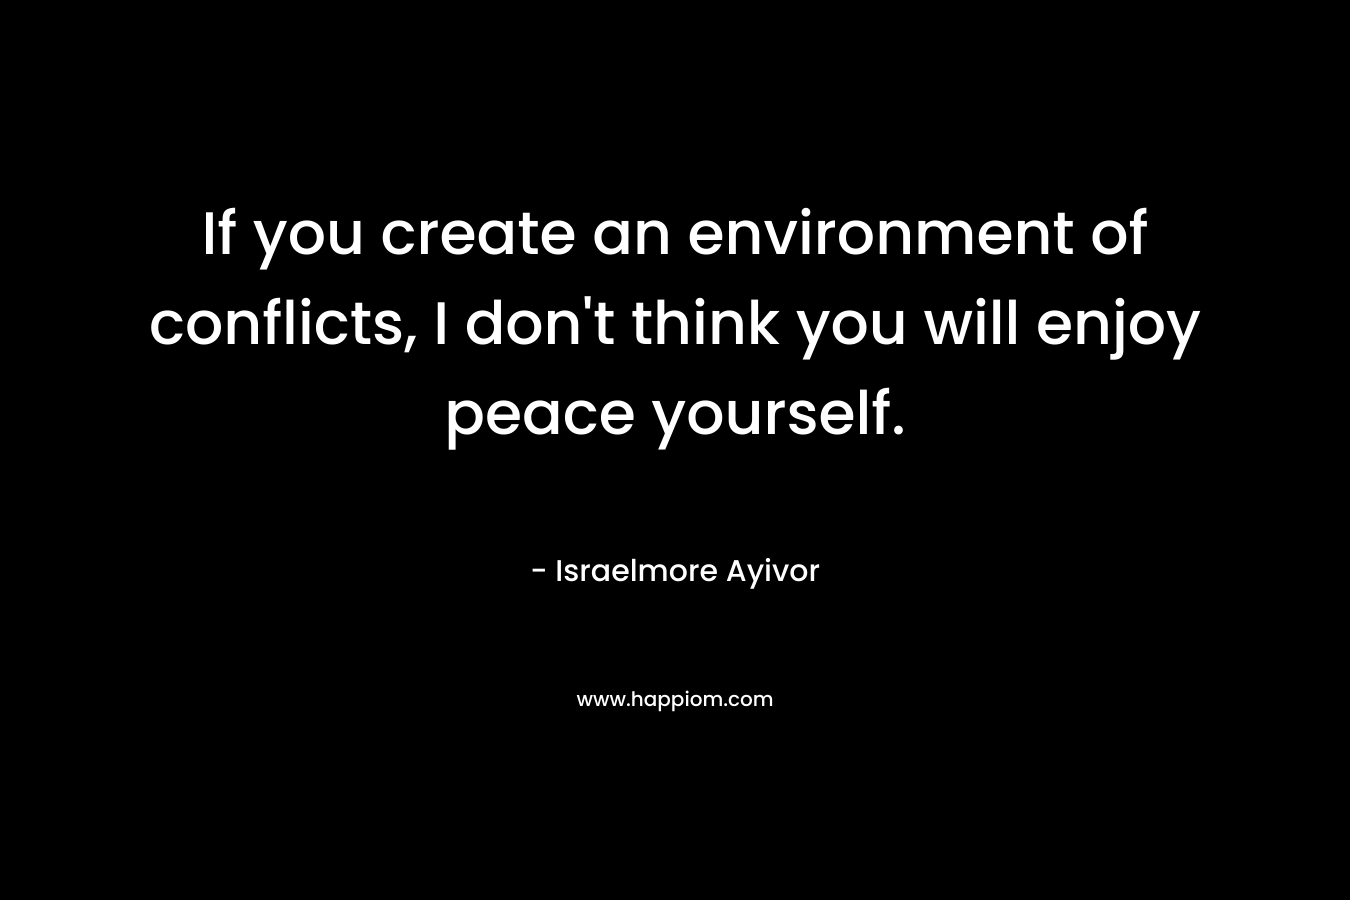 If you create an environment of conflicts, I don't think you will enjoy peace yourself.